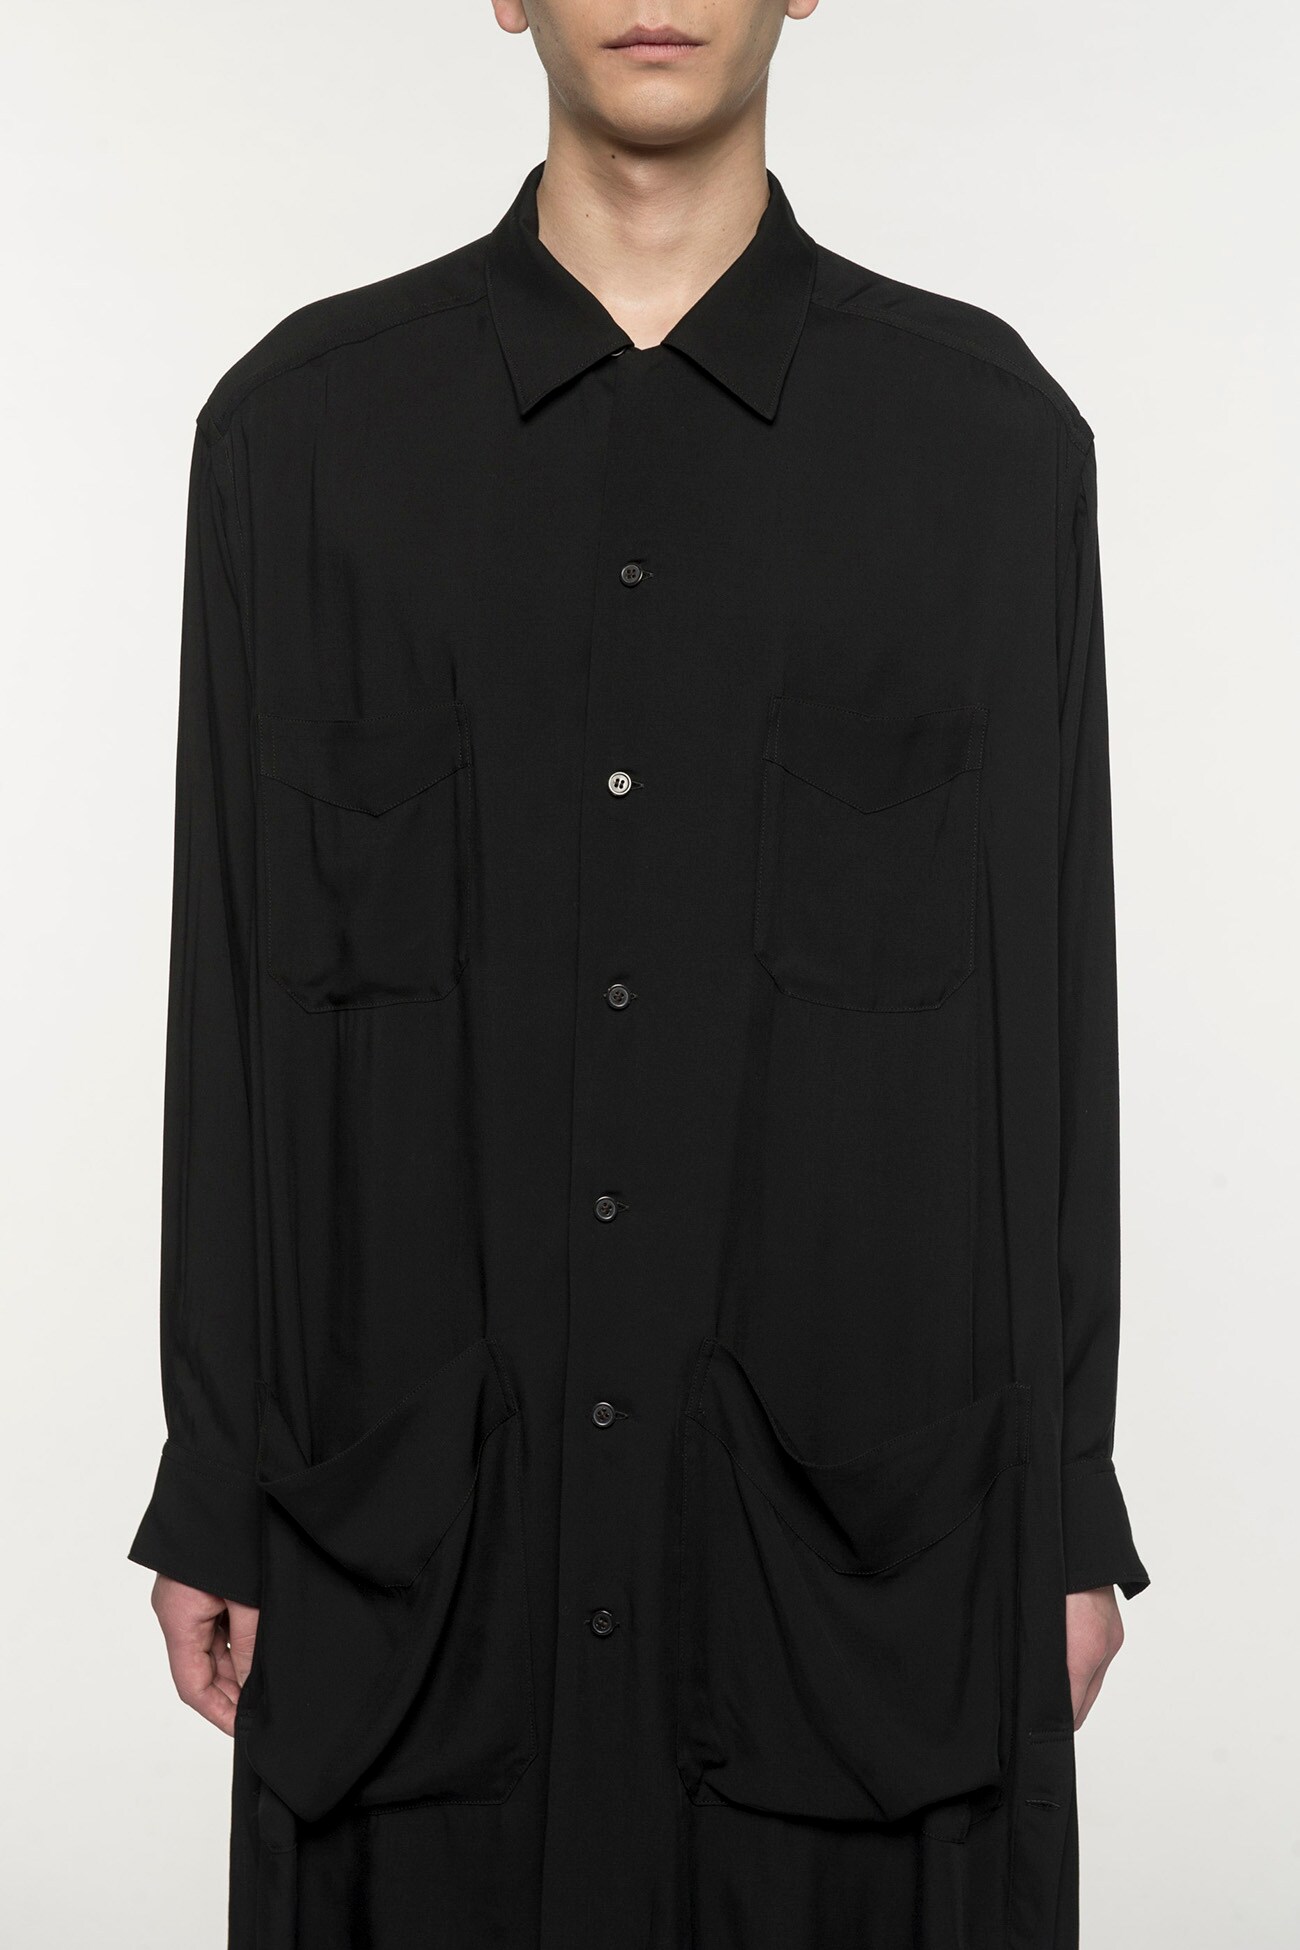 60s Ry/Span Twill Washer 4 Pocket Open Long Shirt